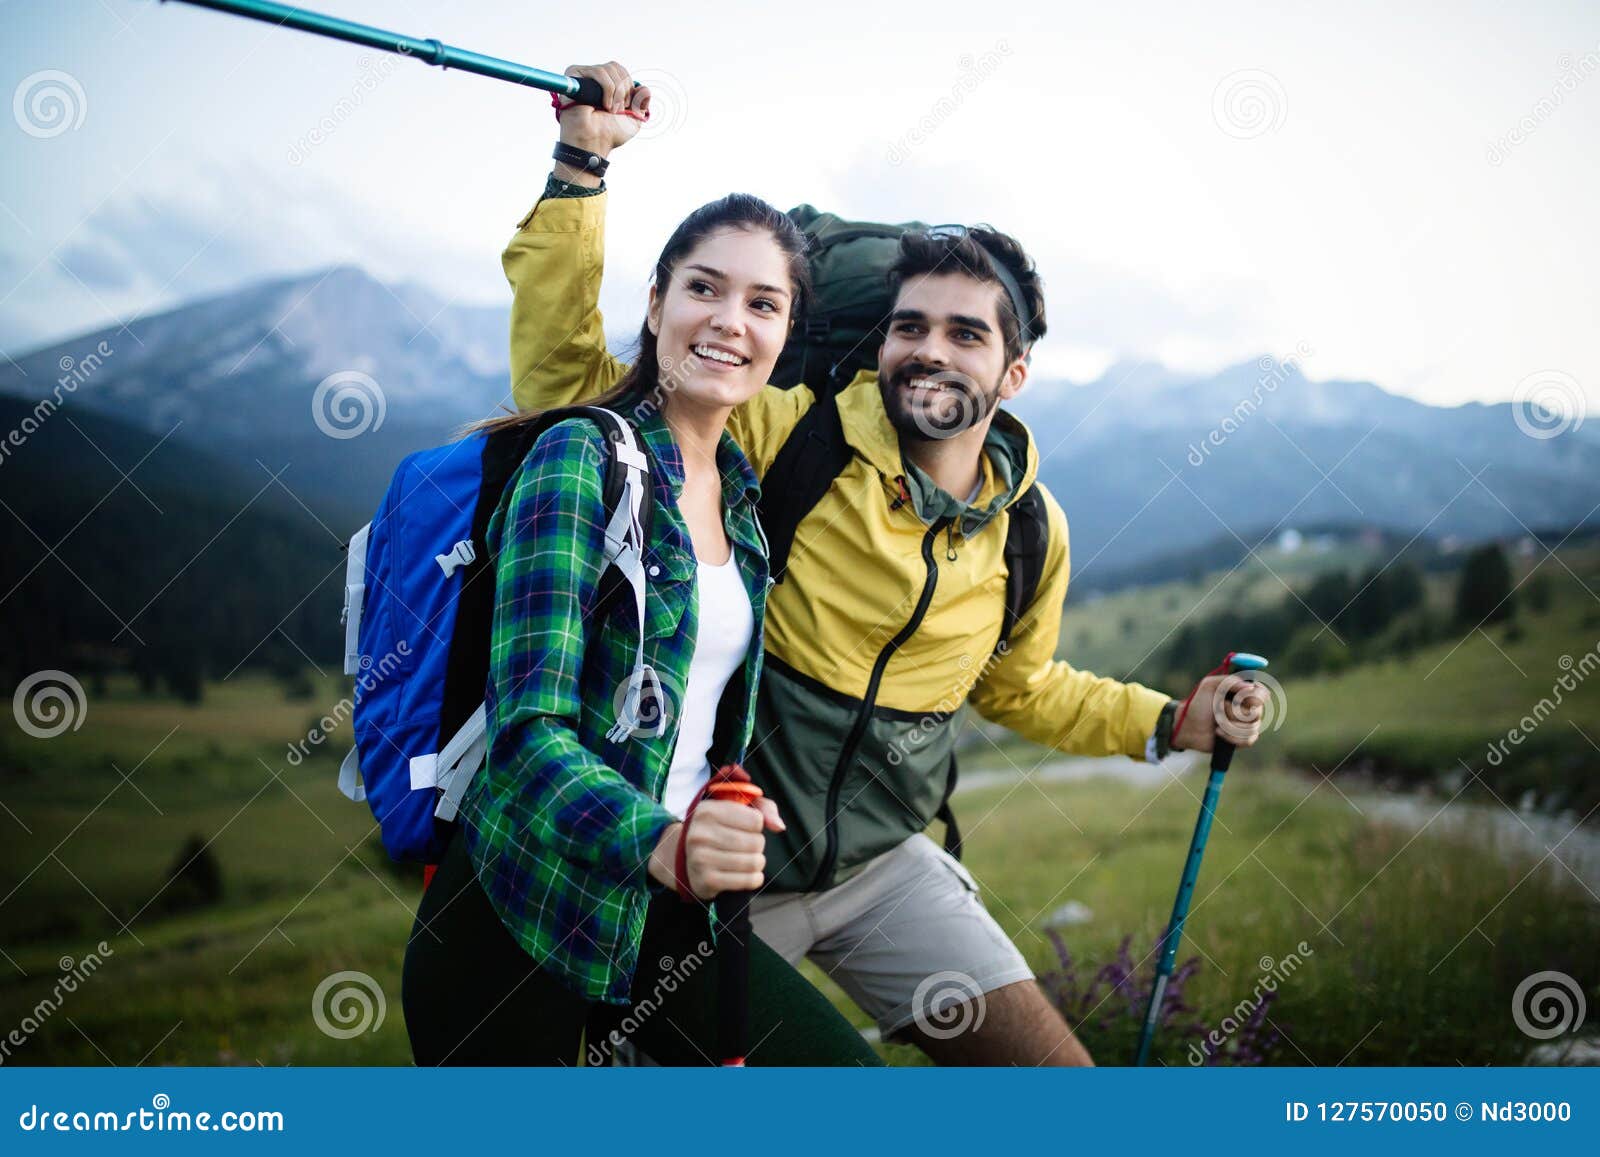 Portrait Of Happy Young Couple Having Fun On Their Hiking Trip Stock